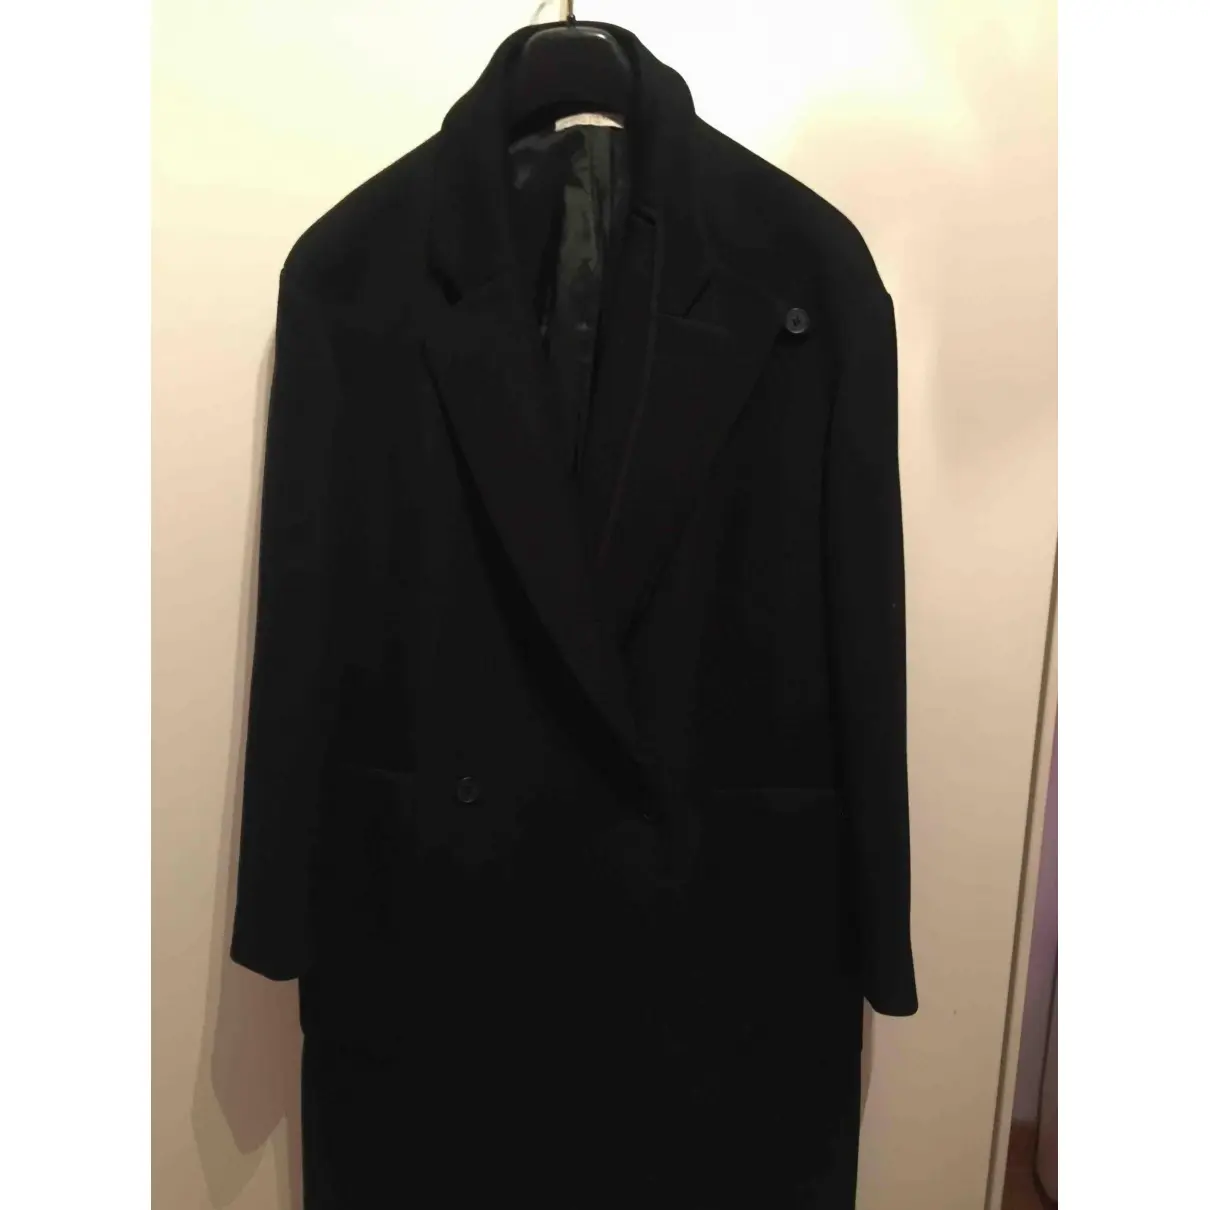 Chalayan Wool coat for sale - Vintage